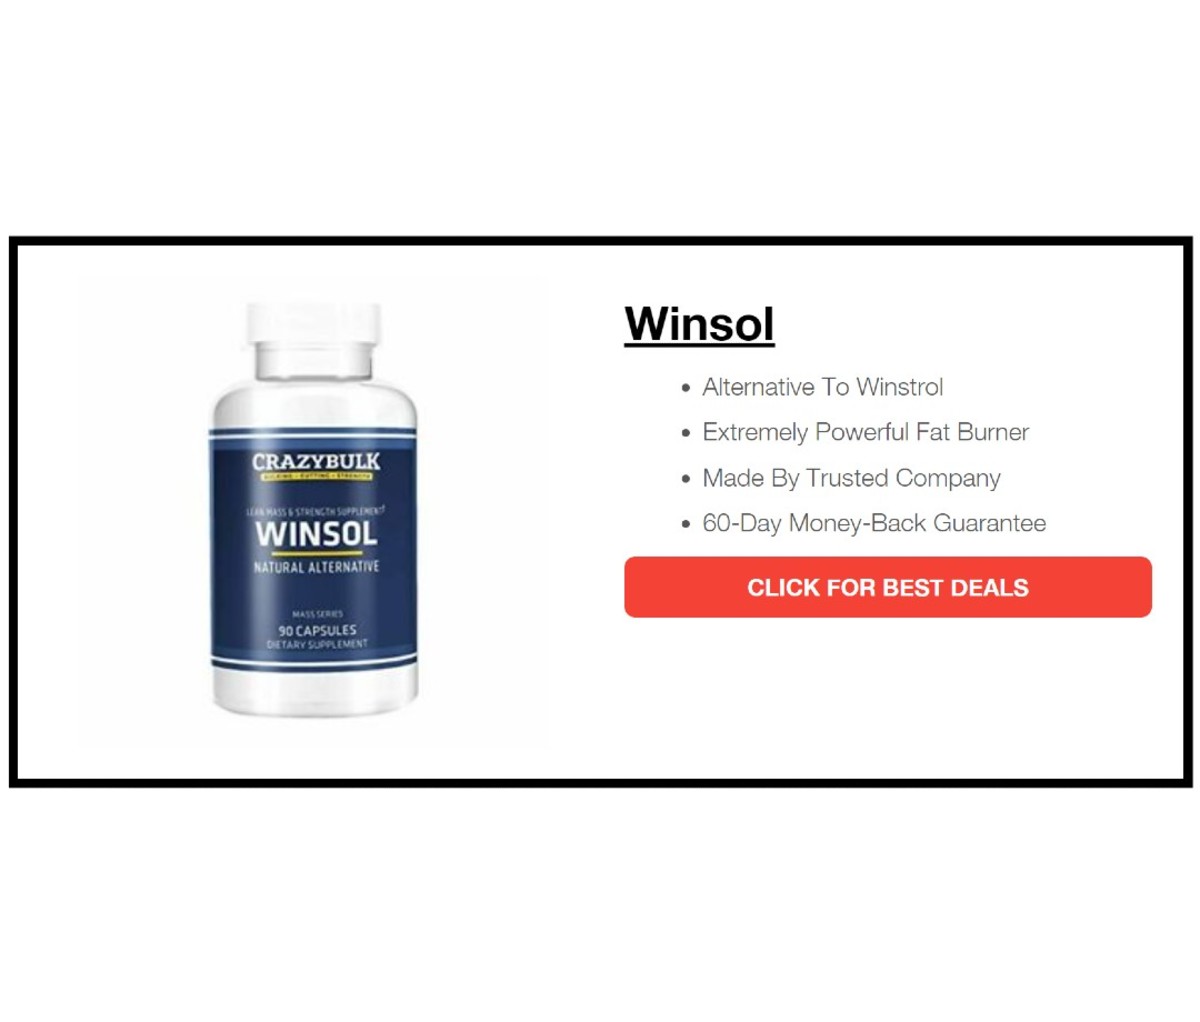 Winsol - Popular Steroids for Ultimate Vascularity